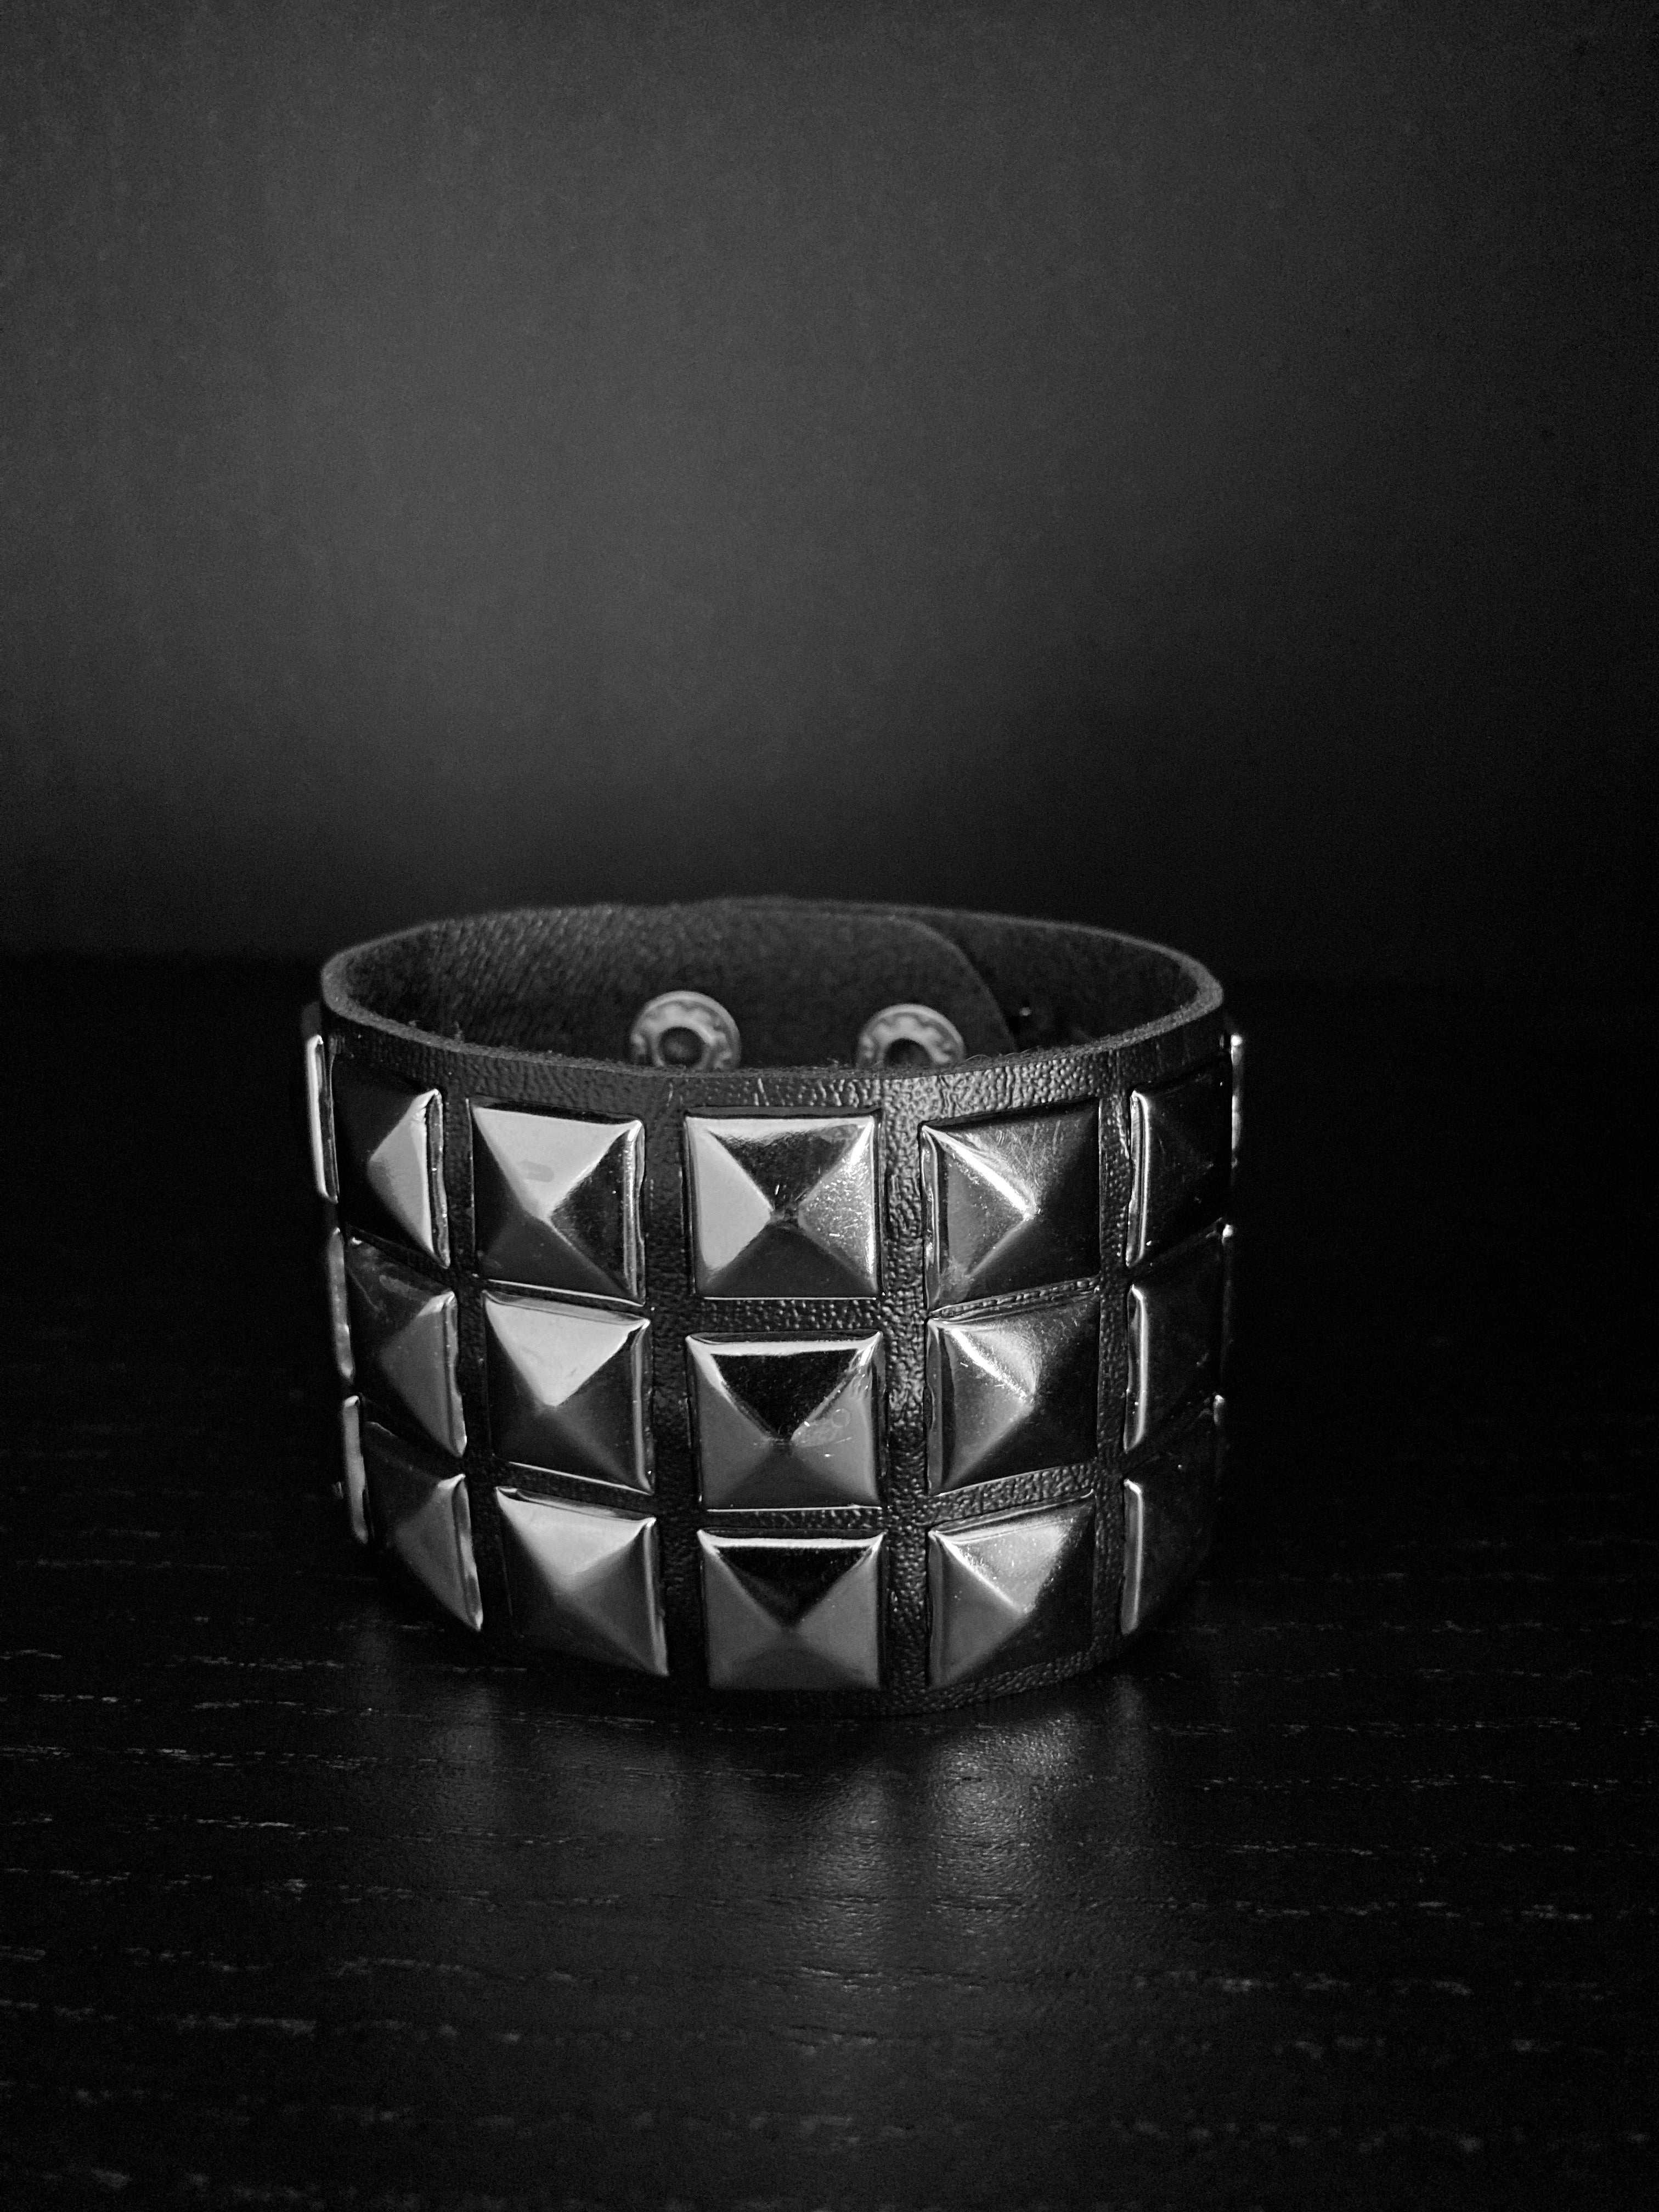 Black Leather Cuff Bracelet with Skull Engraving, Thick and Edgy Wristwear